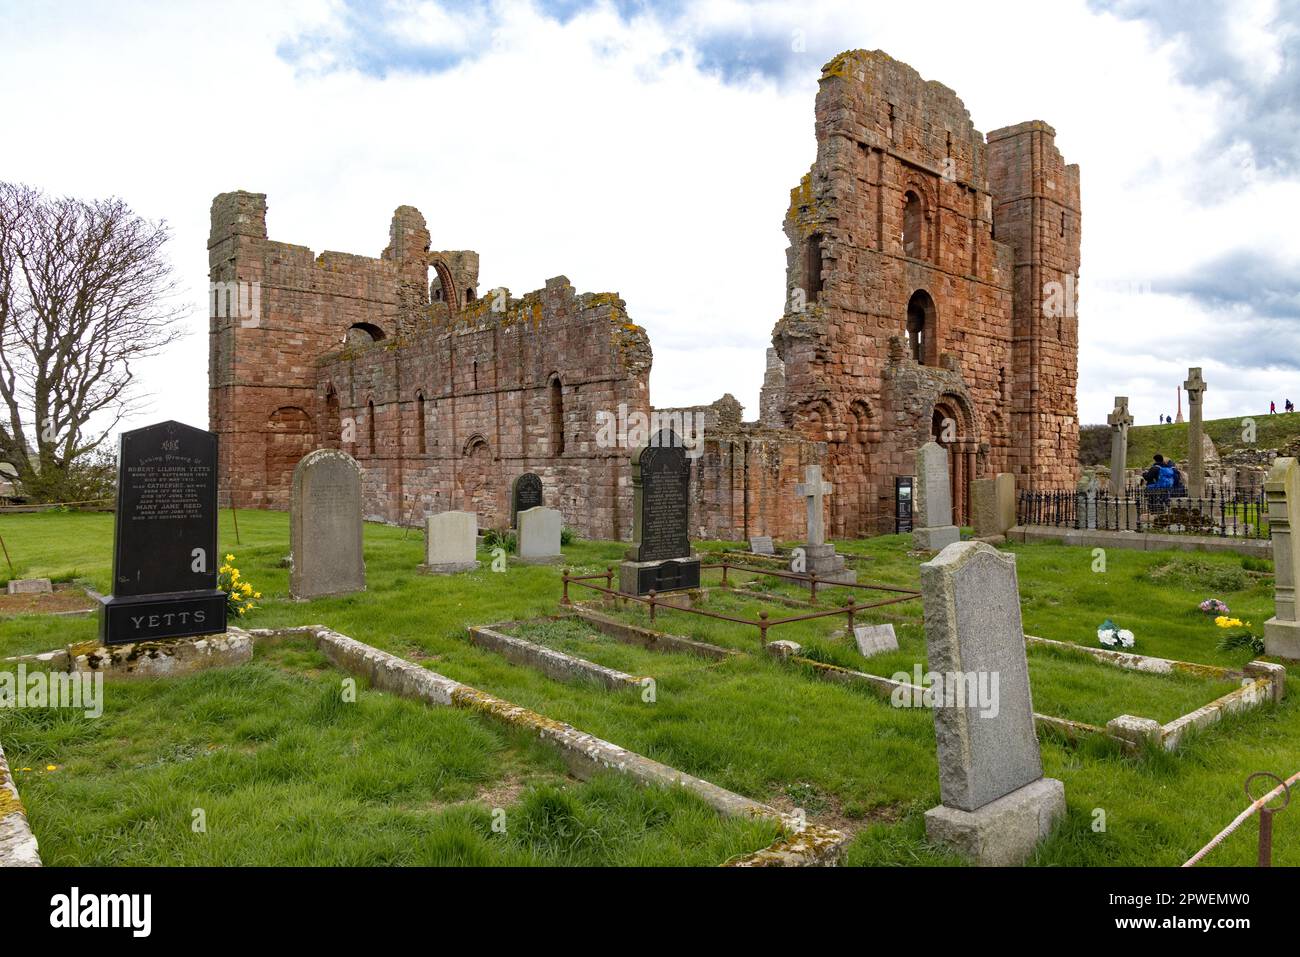 Lindisfarne Priory ruins; 7th century monastery associated with St Cuthbert and early christianity, on Lindisfarne or Holy Island Northumberland UK Stock Photo